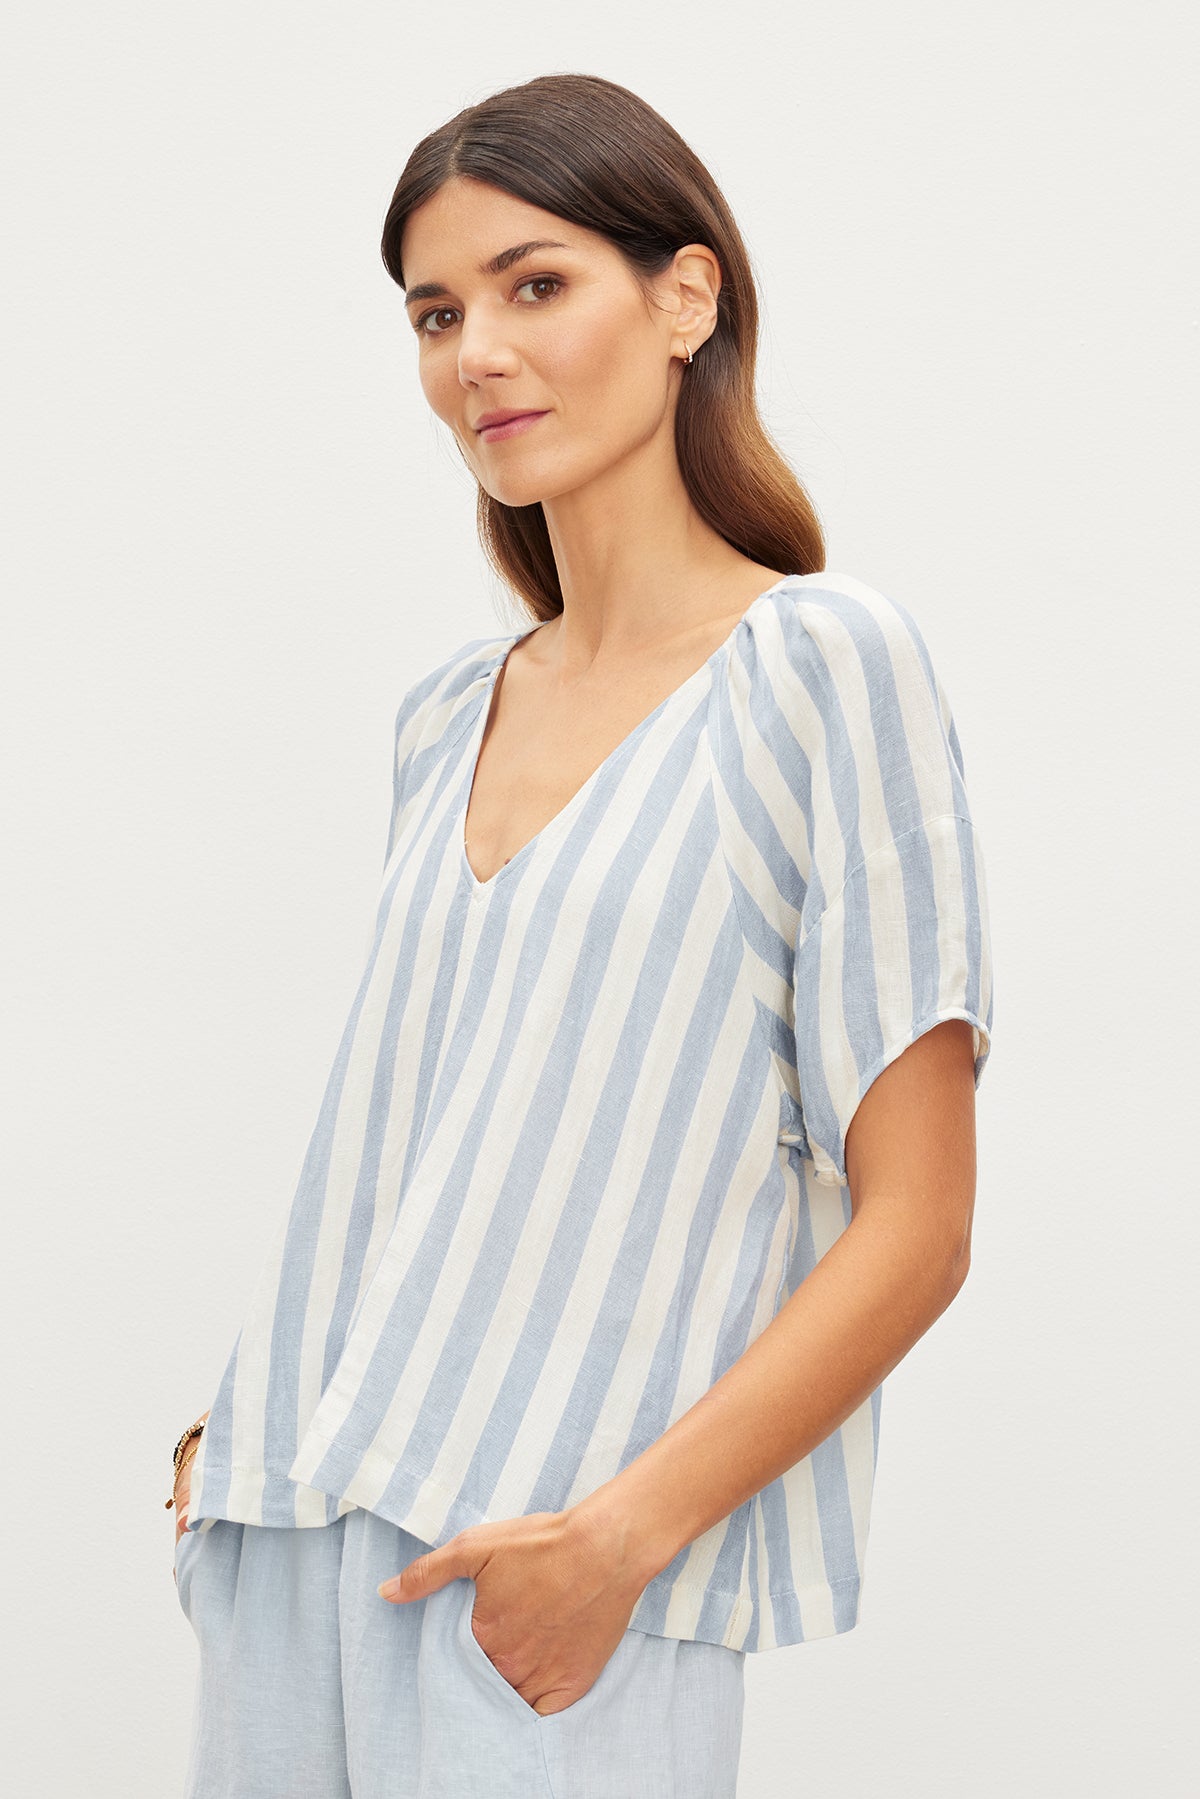 The model is wearing a relaxed fit blue and white striped top, the KATY STRIPED LINEN TOP, with West Coast vibes from Velvet by Graham & Spencer.-35967634636993